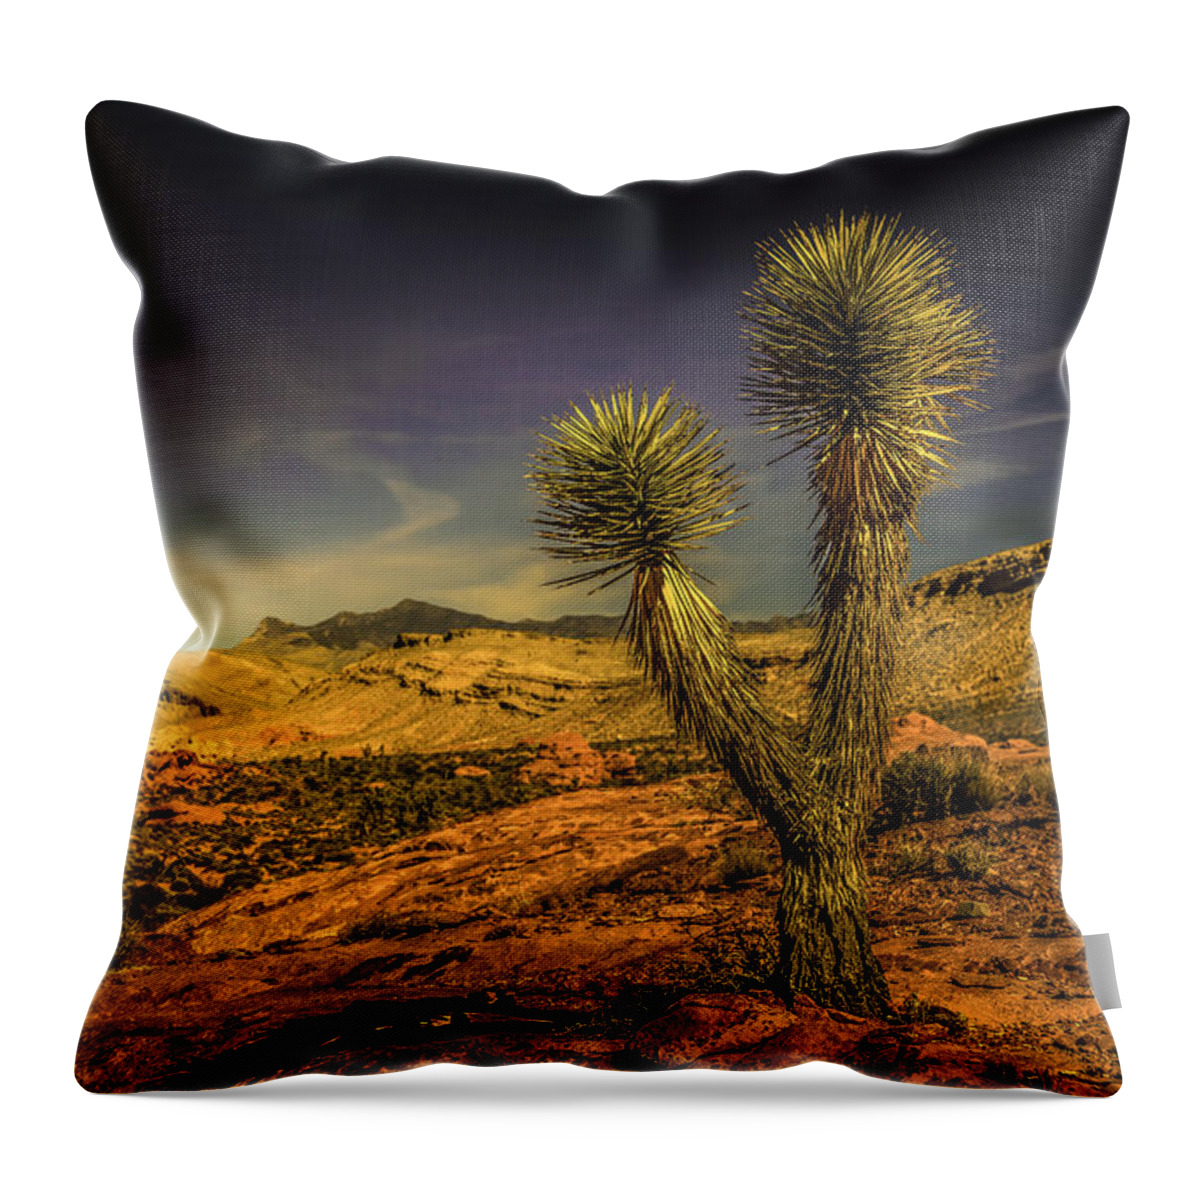 Joshua Throw Pillow featuring the photograph Gold Butte from the Joshua by Janis Knight